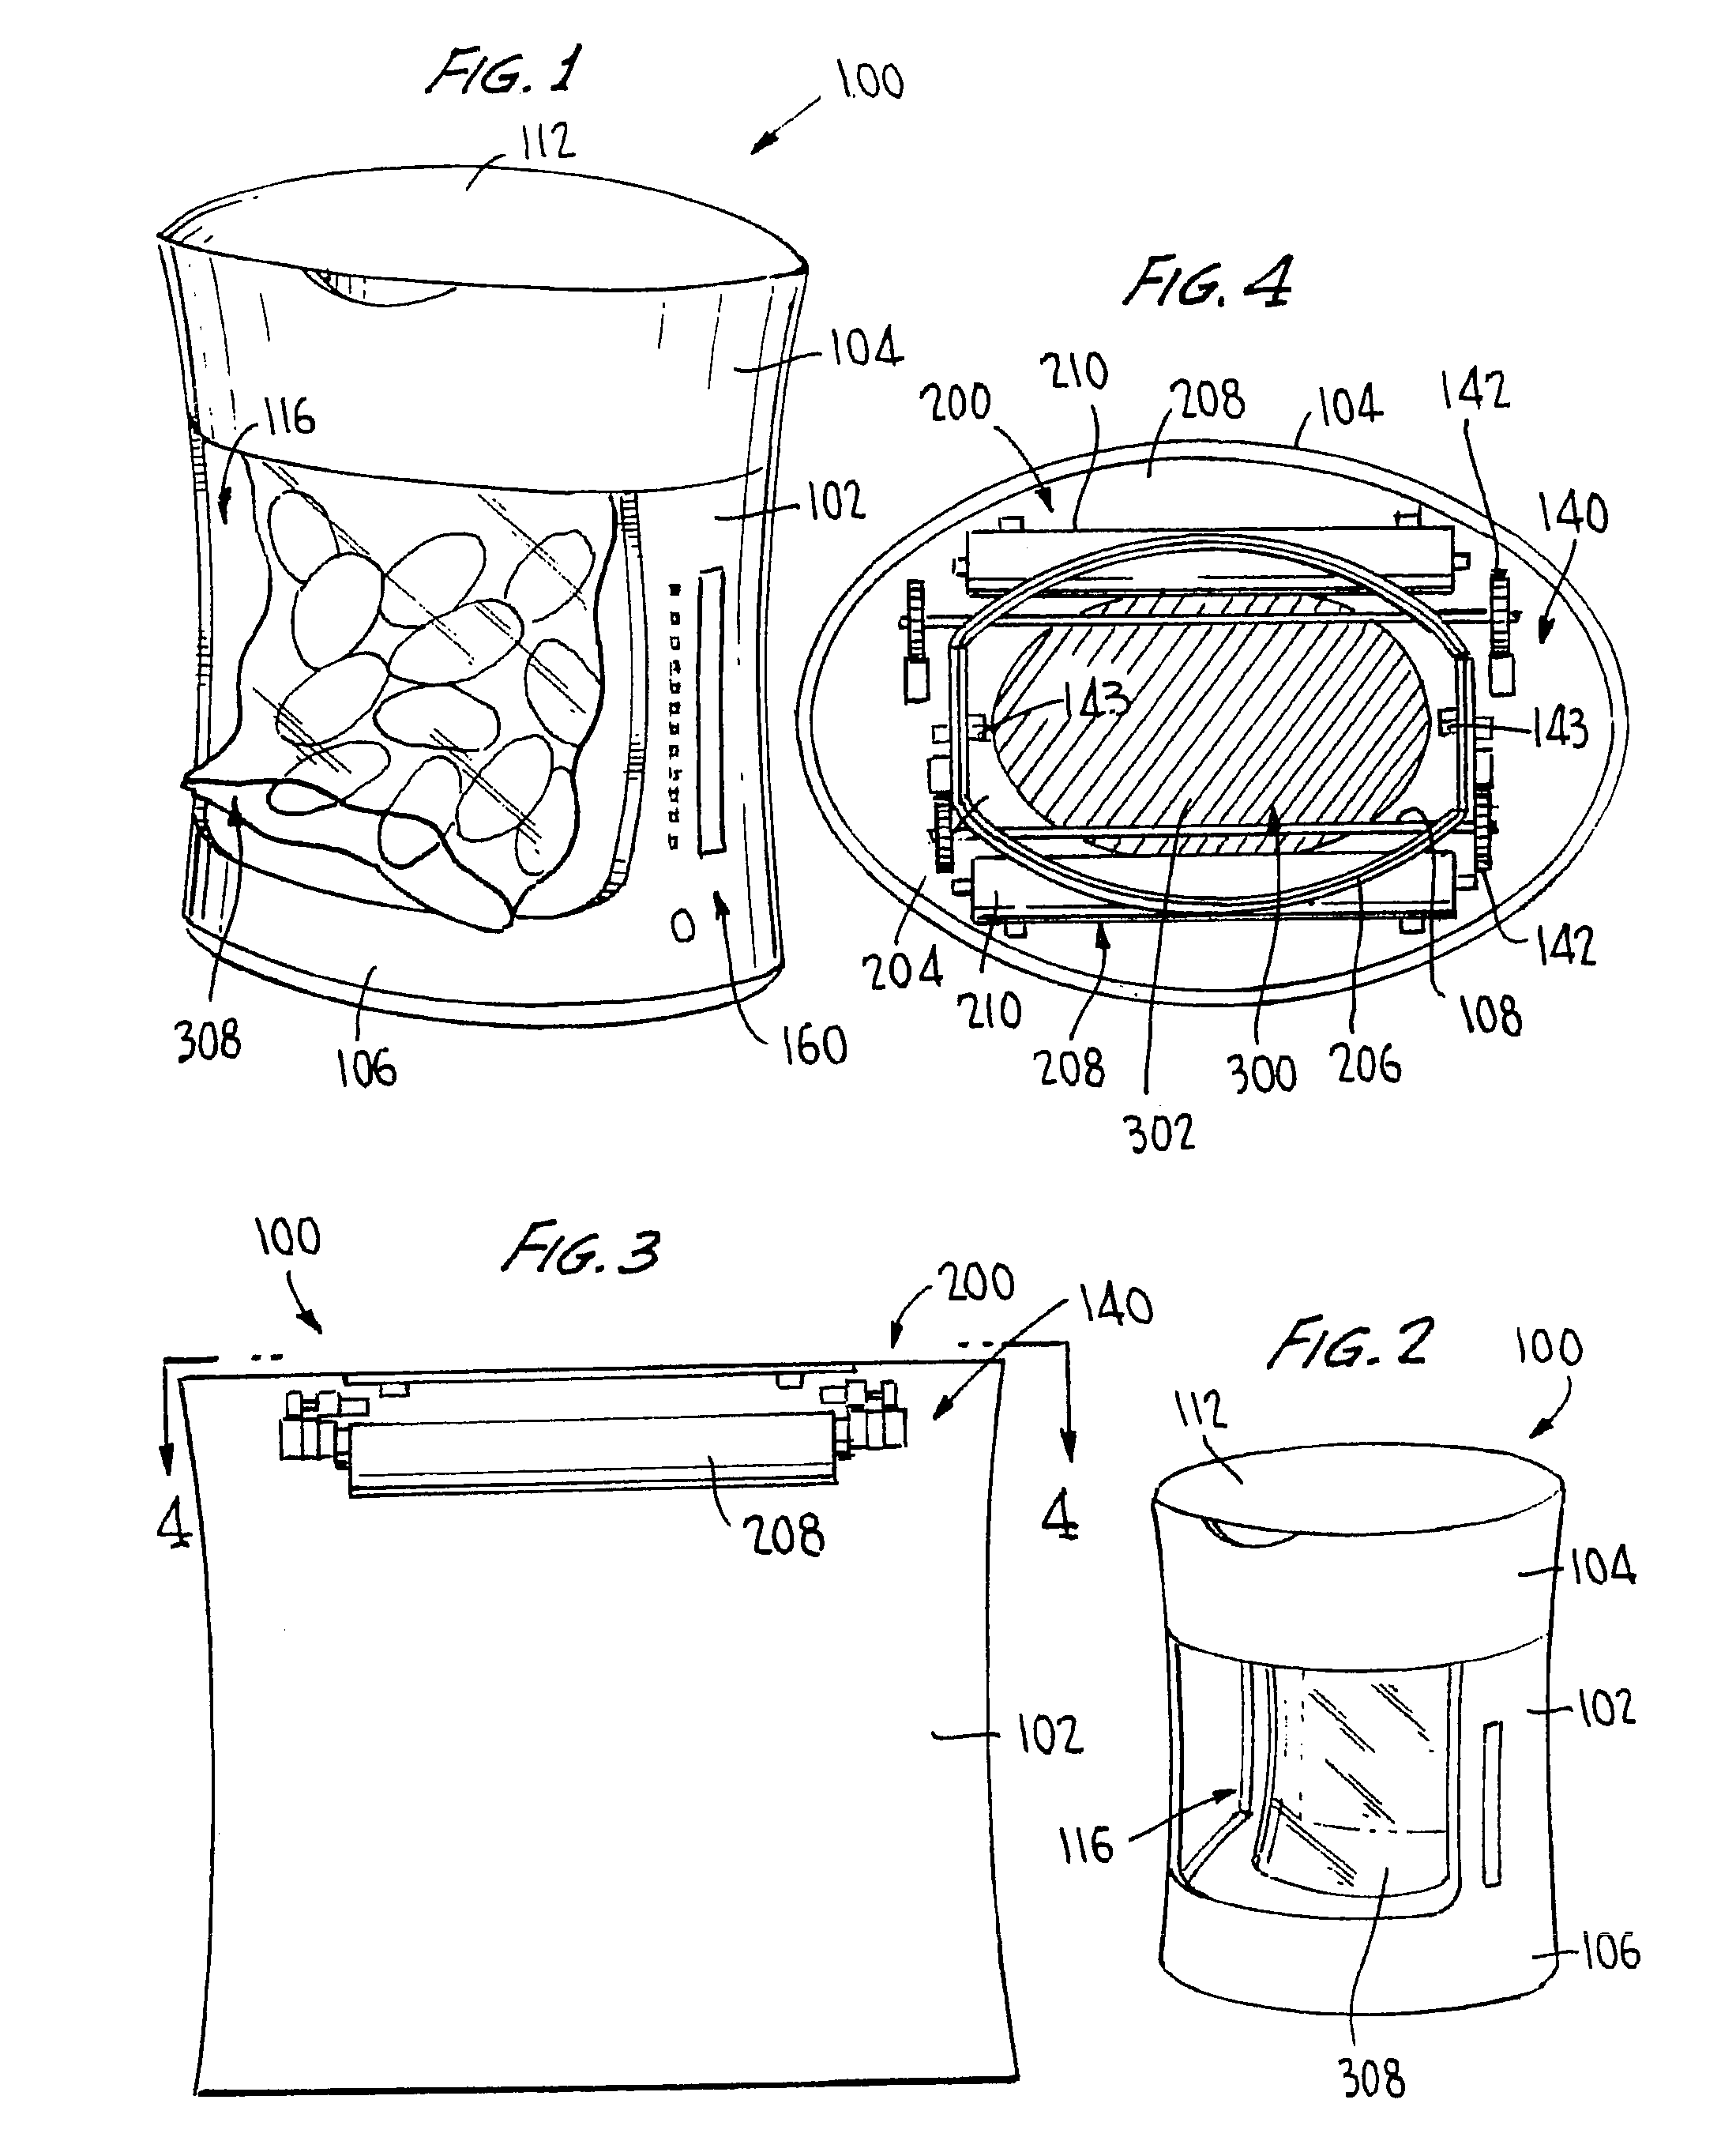 Vacuum sealer apparatus and a film cartridge for a vacuum sealer and a means of operating the vacuum sealer and the film cartridge